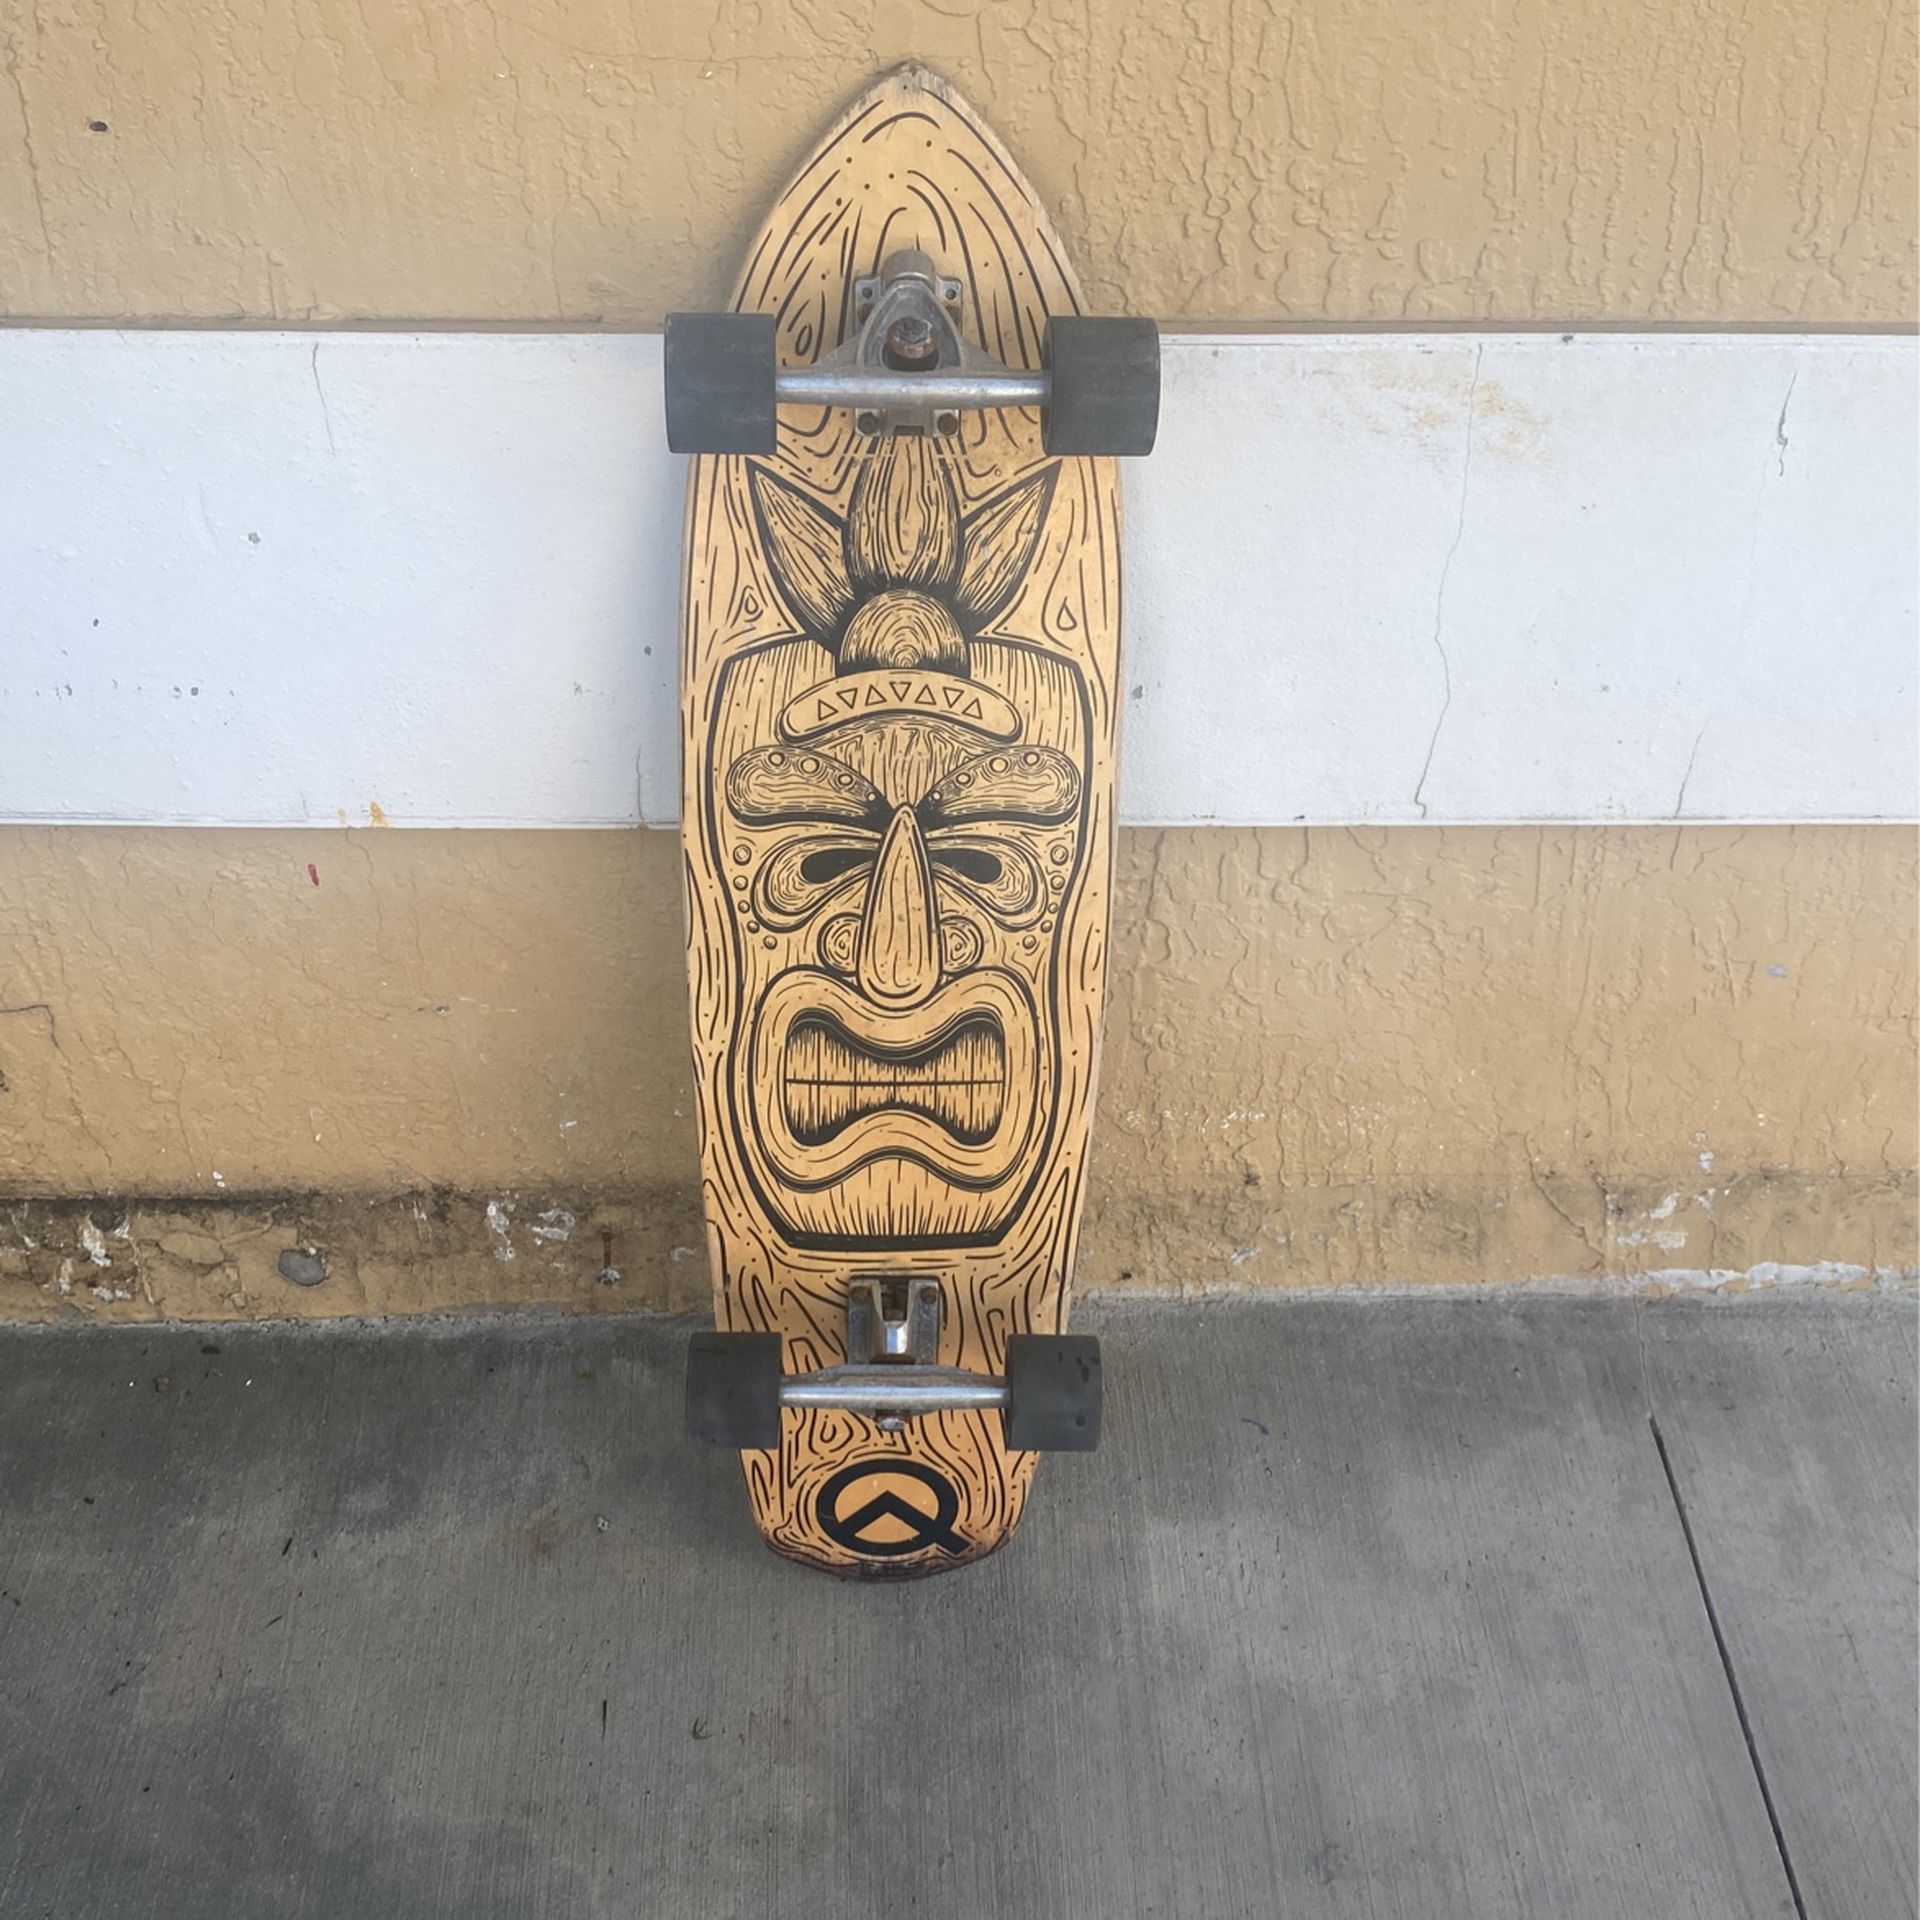 Quest SkateBoard For Sale